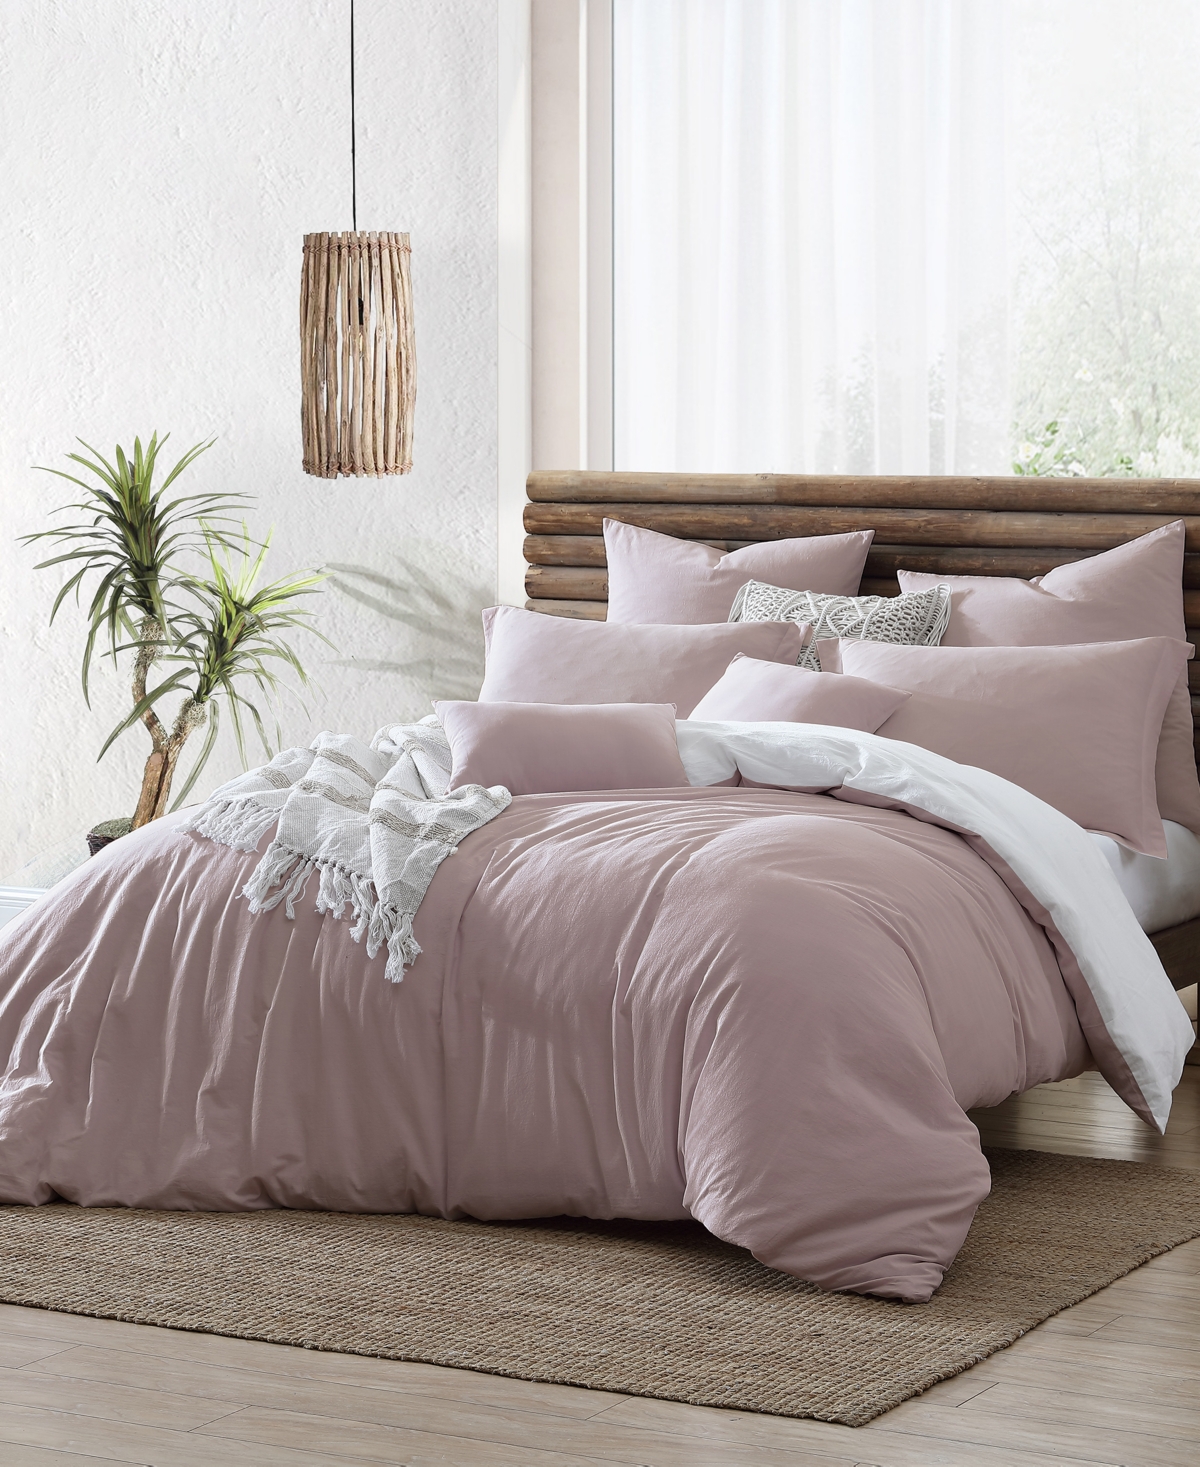 Swift Home Ultra Soft Valatie Cotton Garment Washed Dyed Reversible 3 Piece Duvet Cover Set, Full/queen In Wood Rose,white